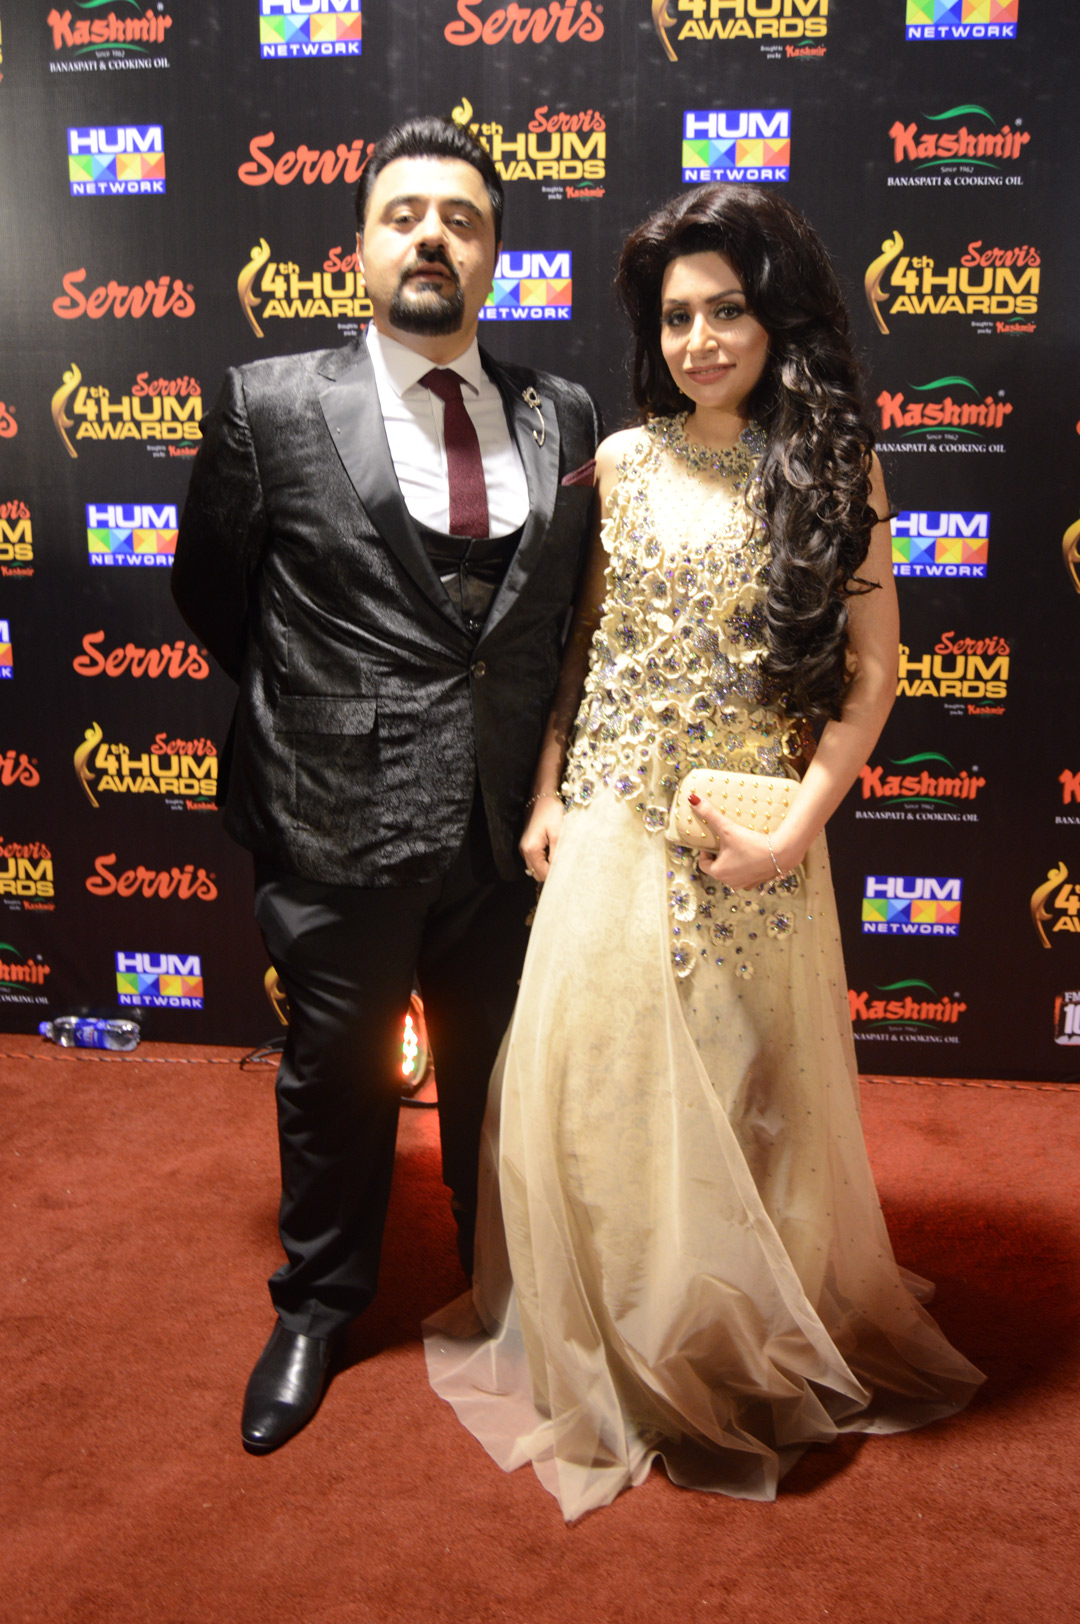 Ahmed Ali Butt with his wife Fatima HUM Awards Red Carpet